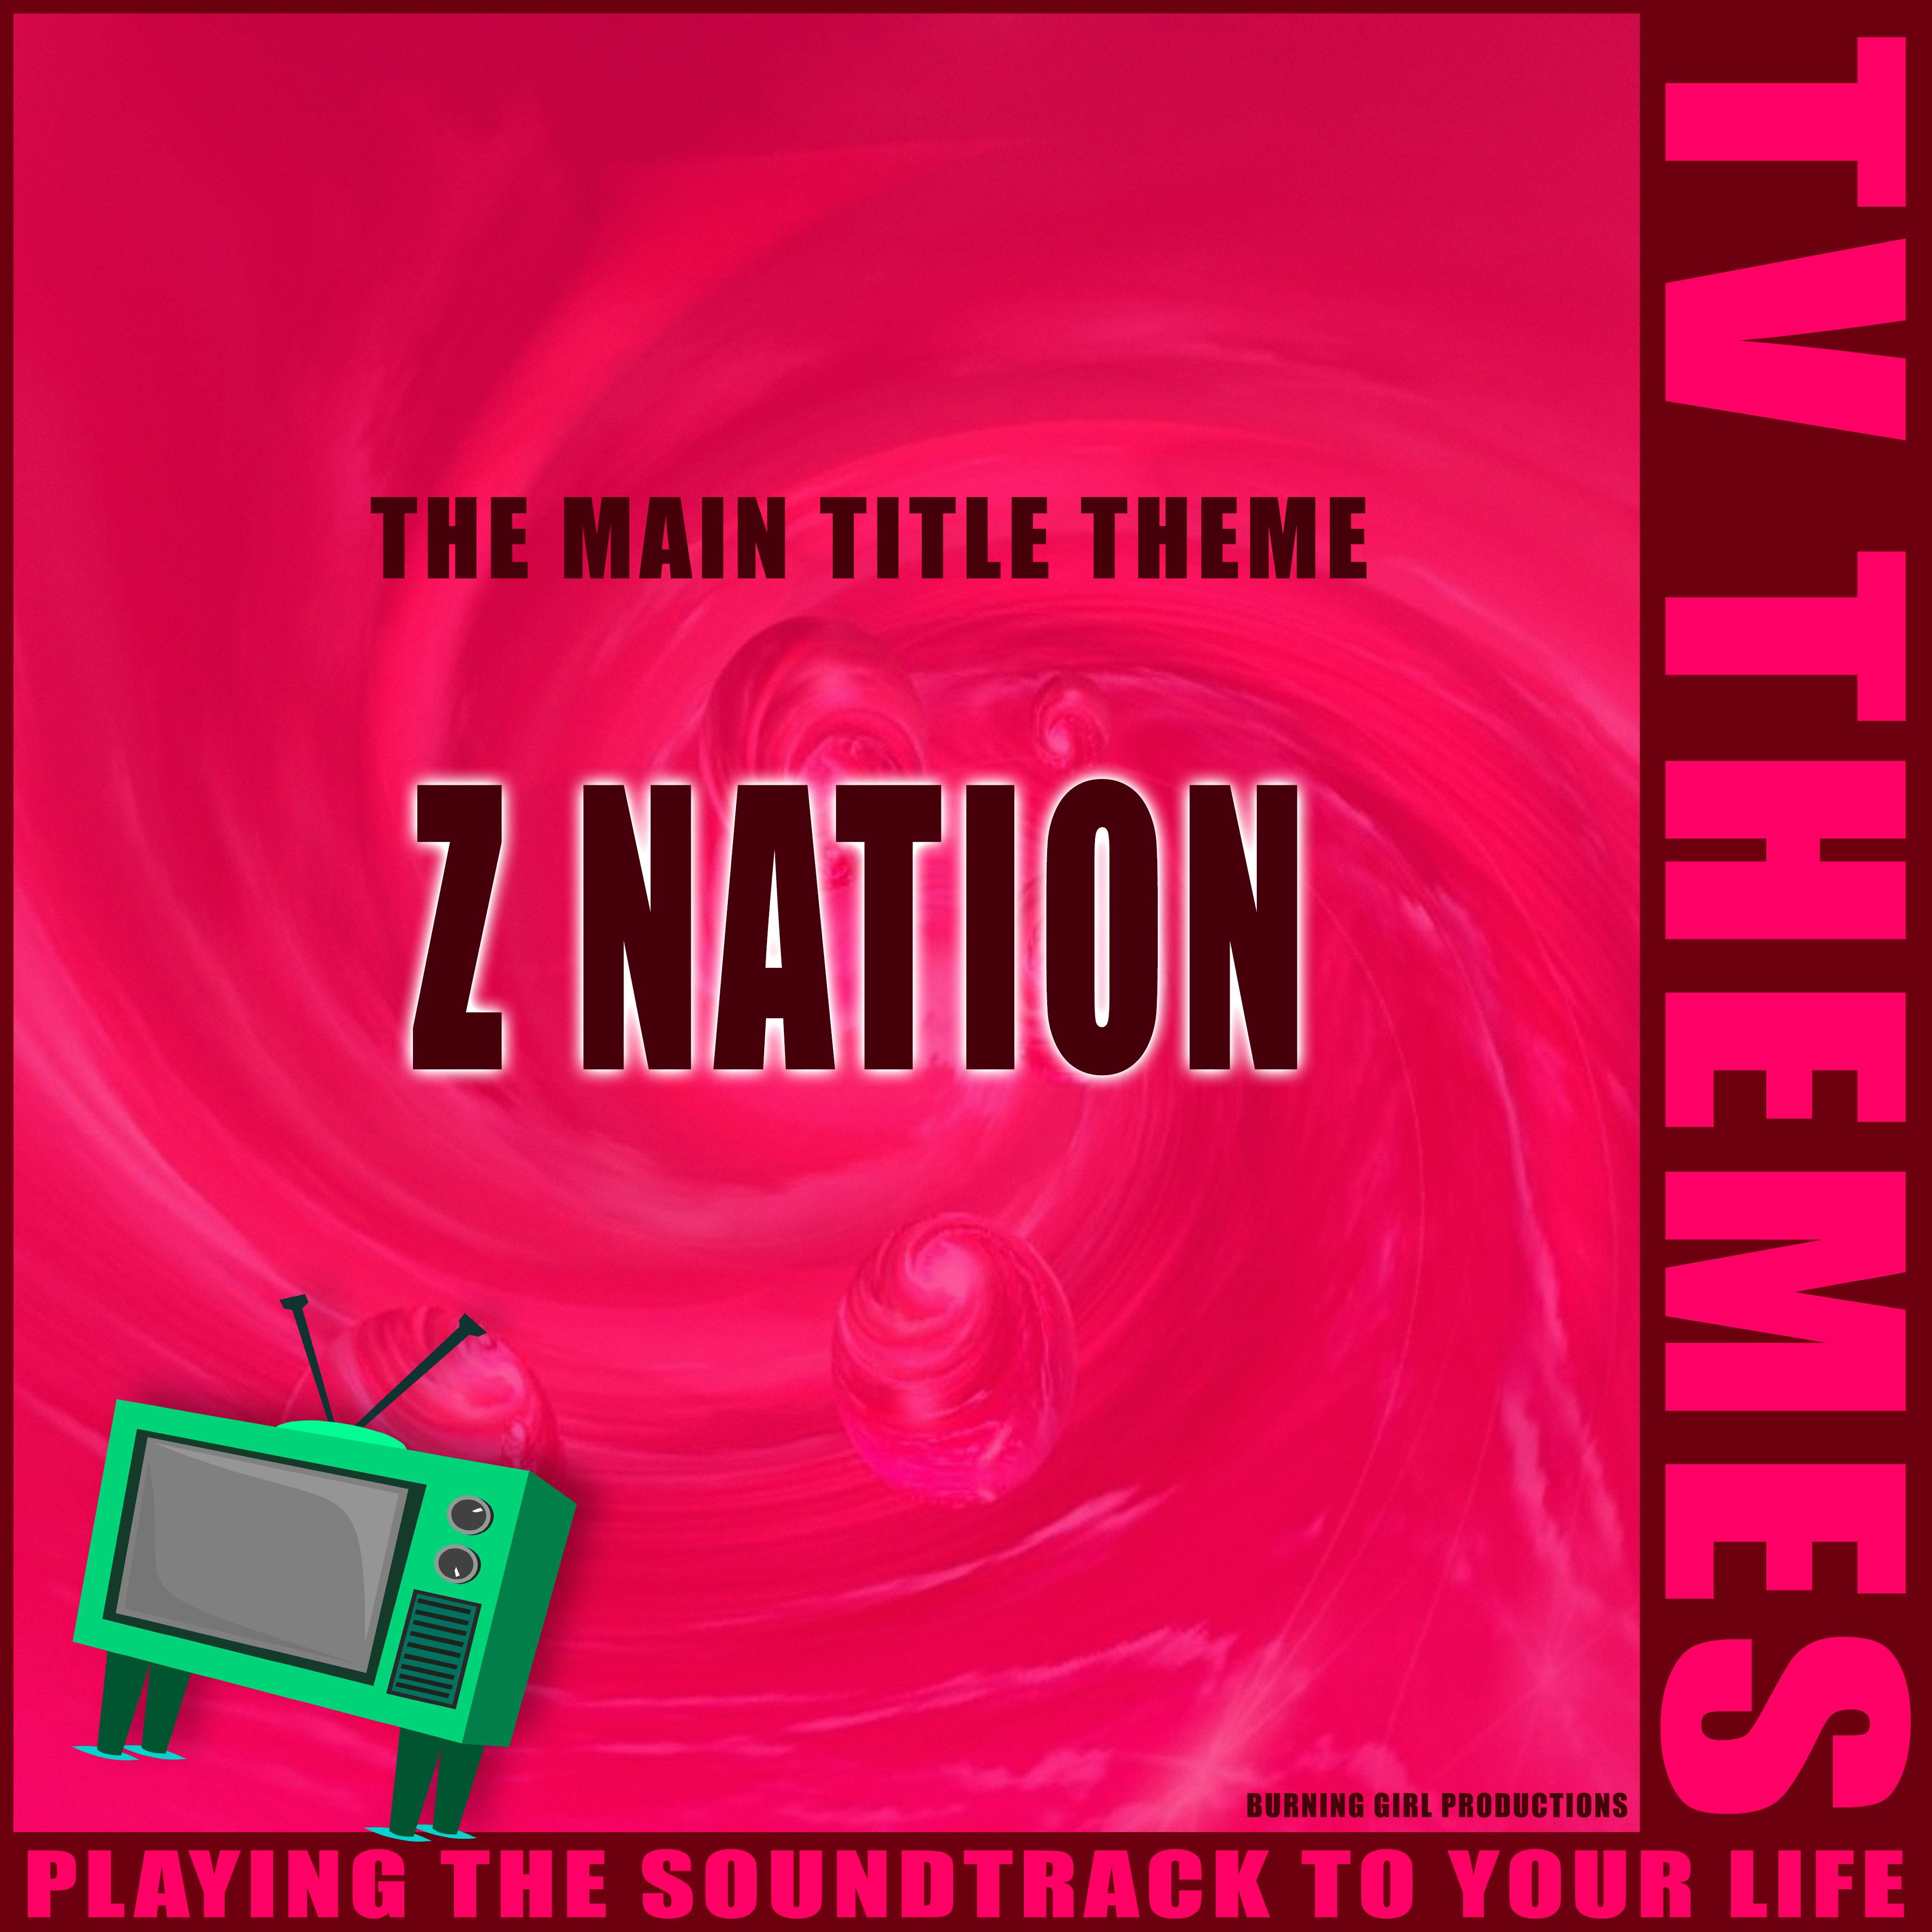 The Main Title Theme - Z Nation